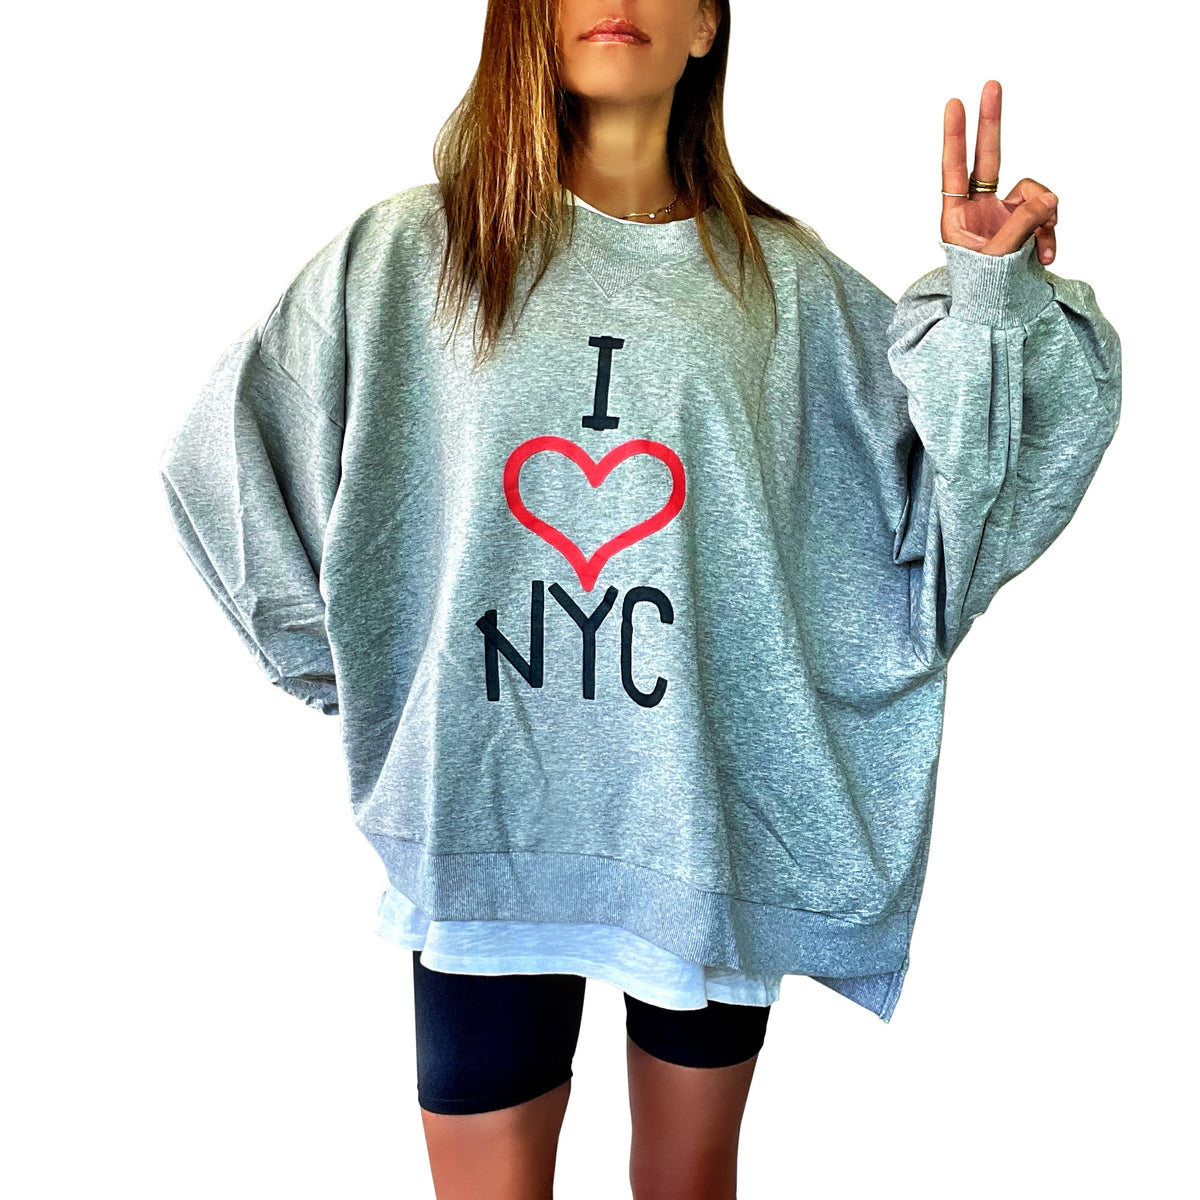 'I Heart NYC' Painted Sweater